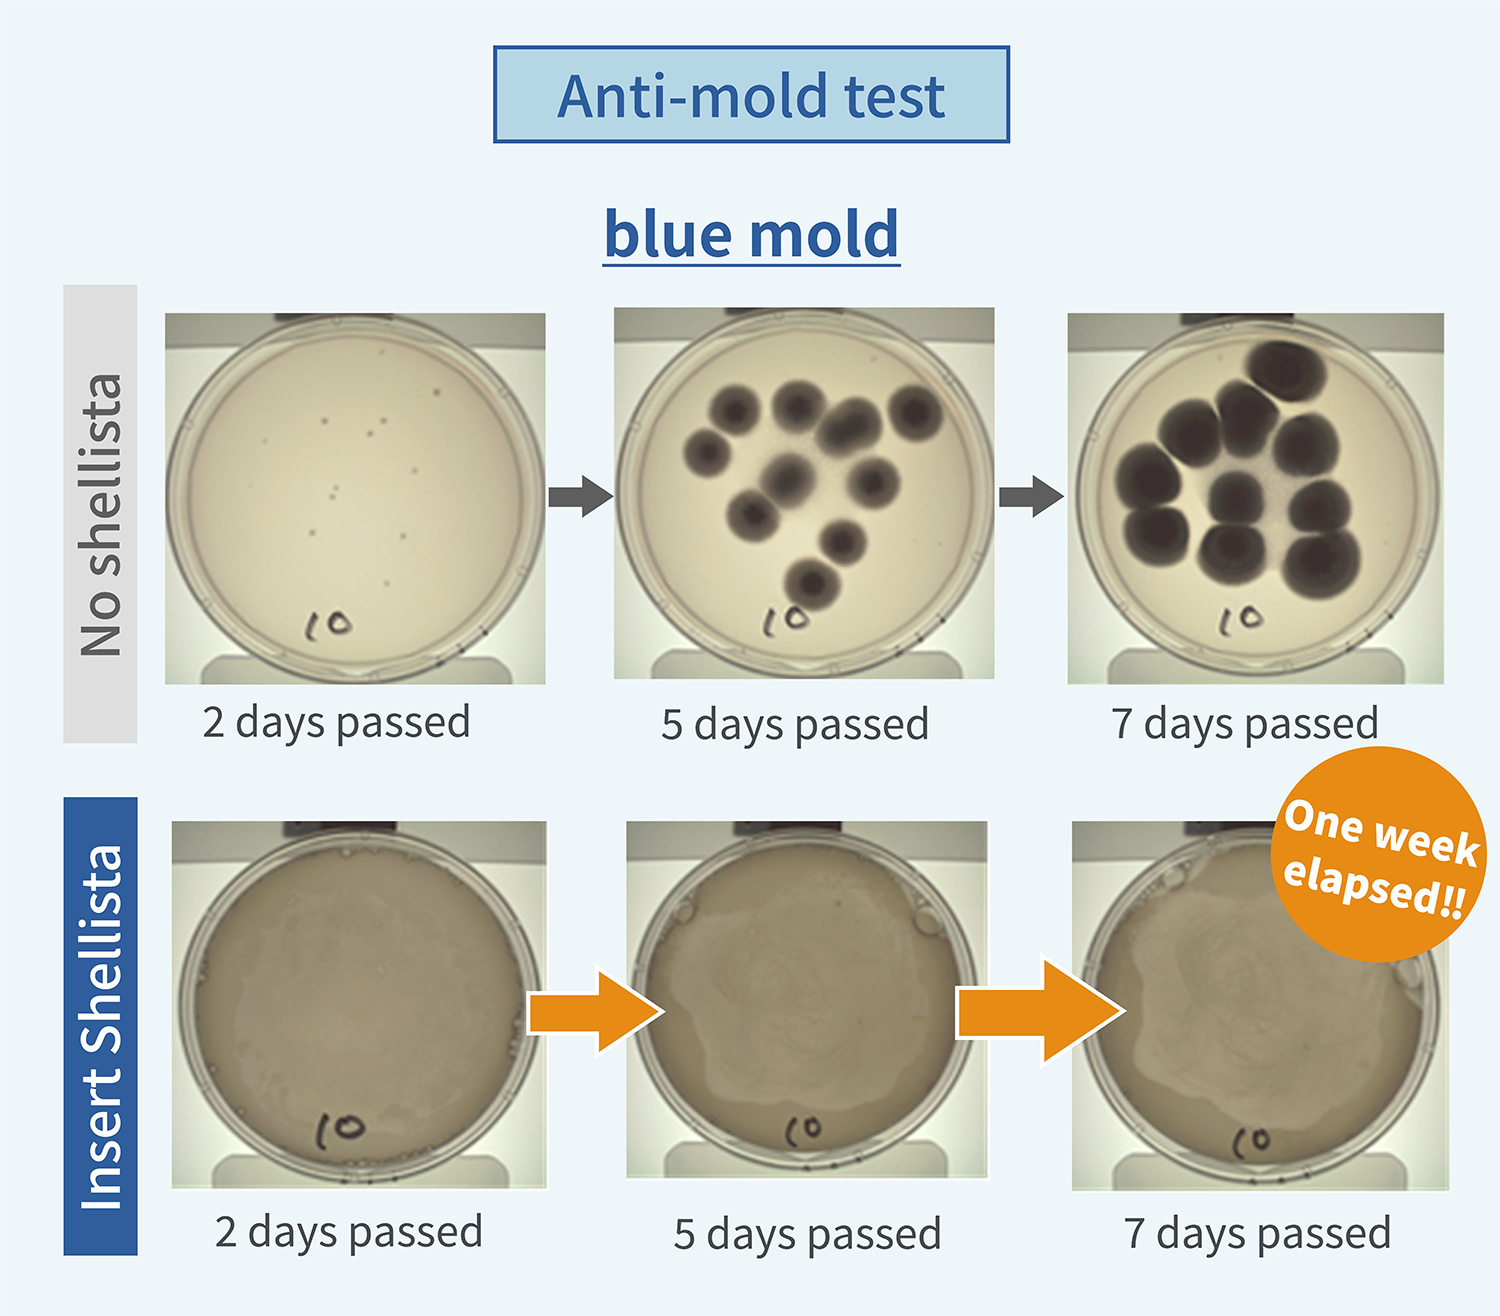 Anti-mold test result1